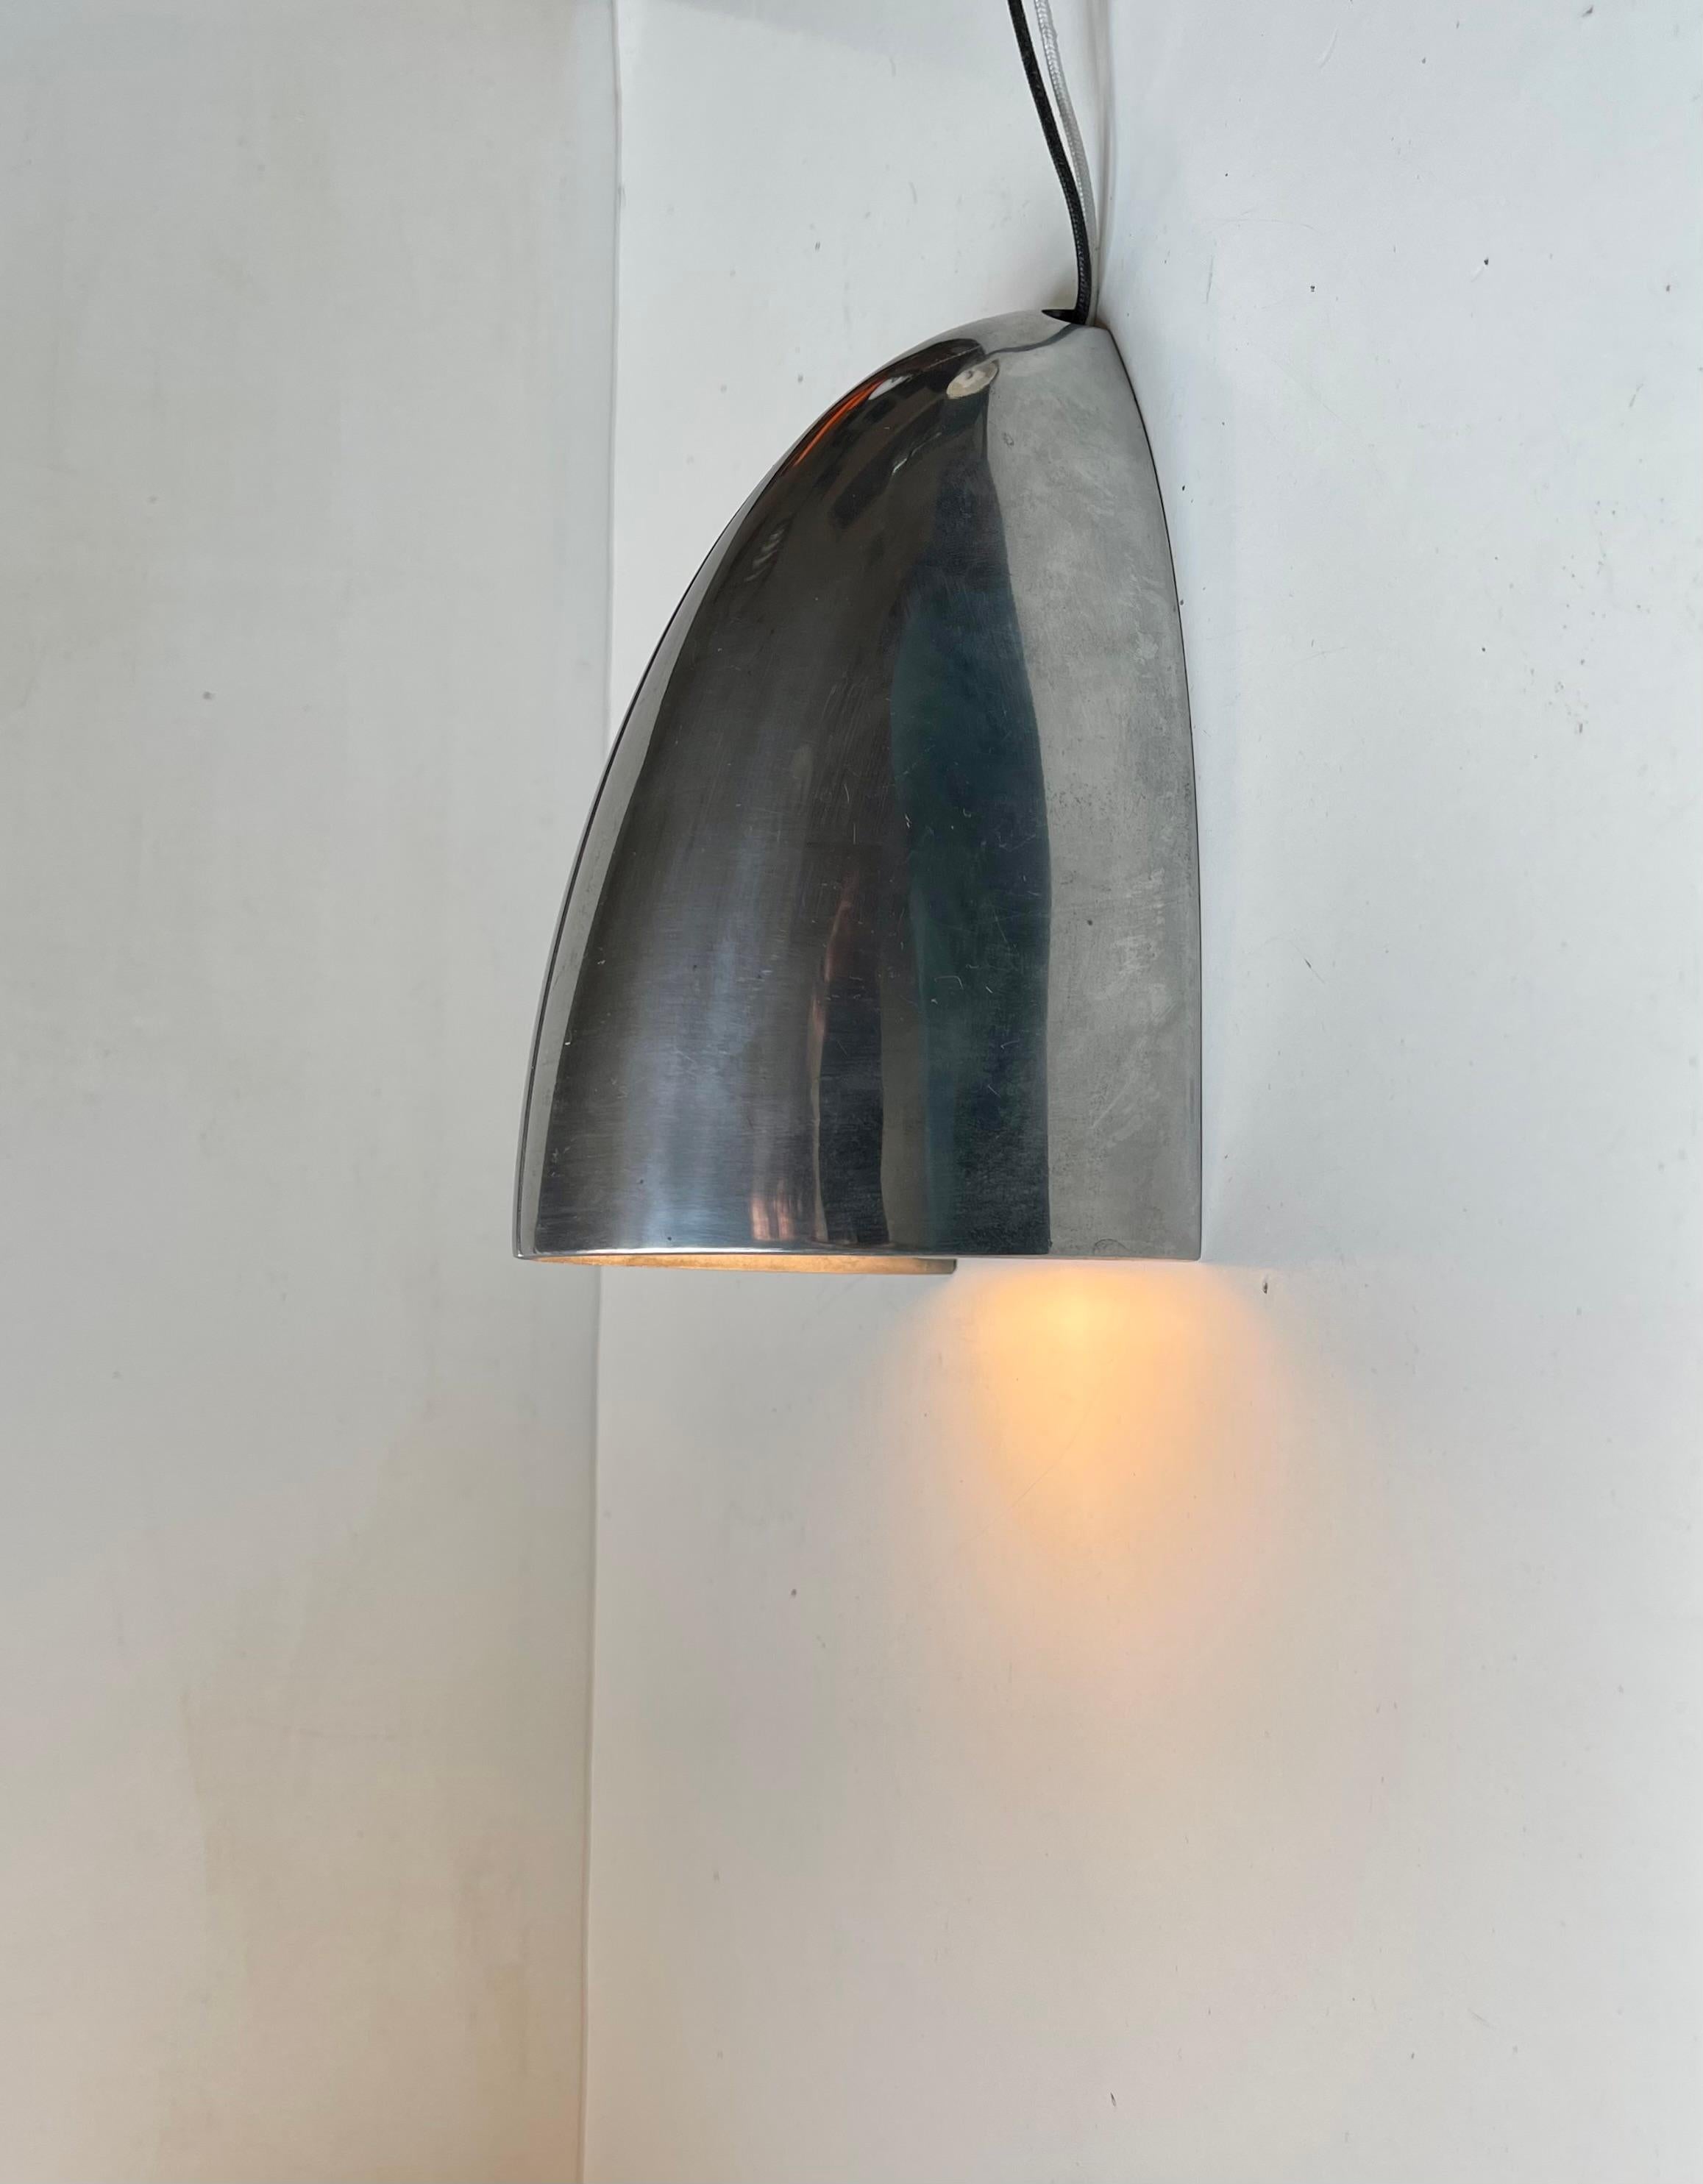 Minimalist Up Light Wall Sconce in Polished Aluminum by Artup USA im Zustand „Gut“ im Angebot in Esbjerg, DK